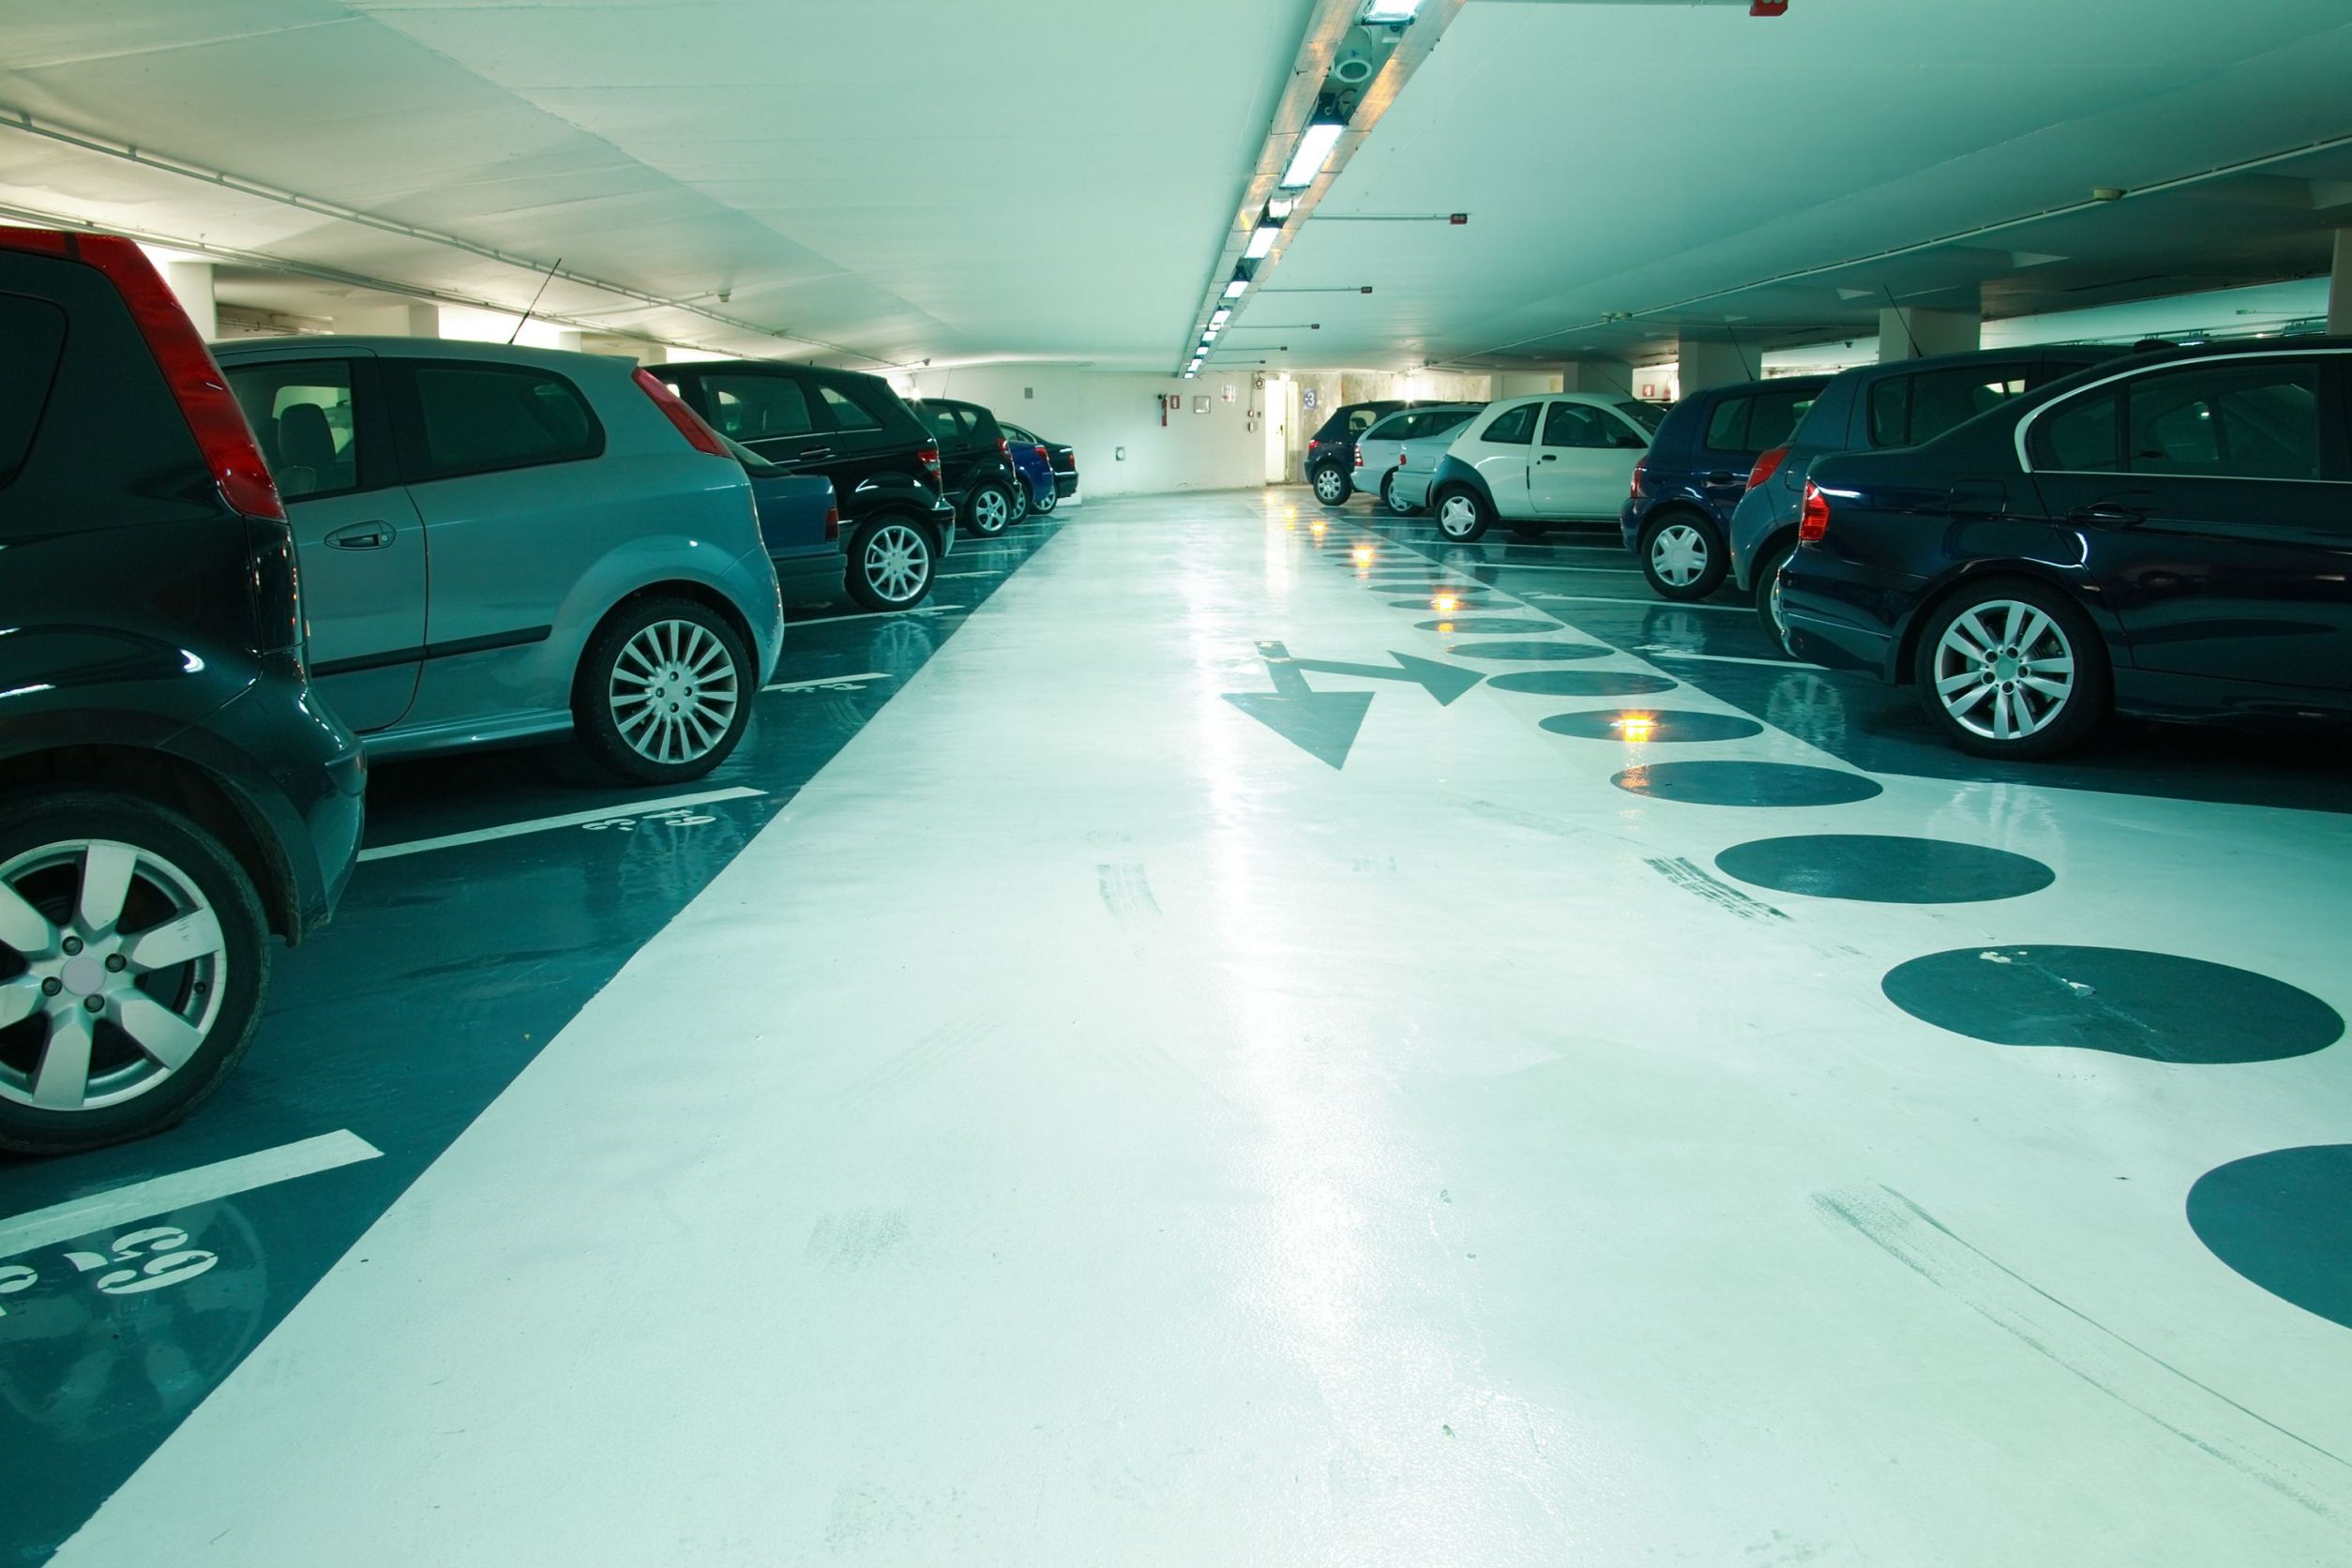 3 Reasons Why You Should Hire Professional Parking Consultants in the USA